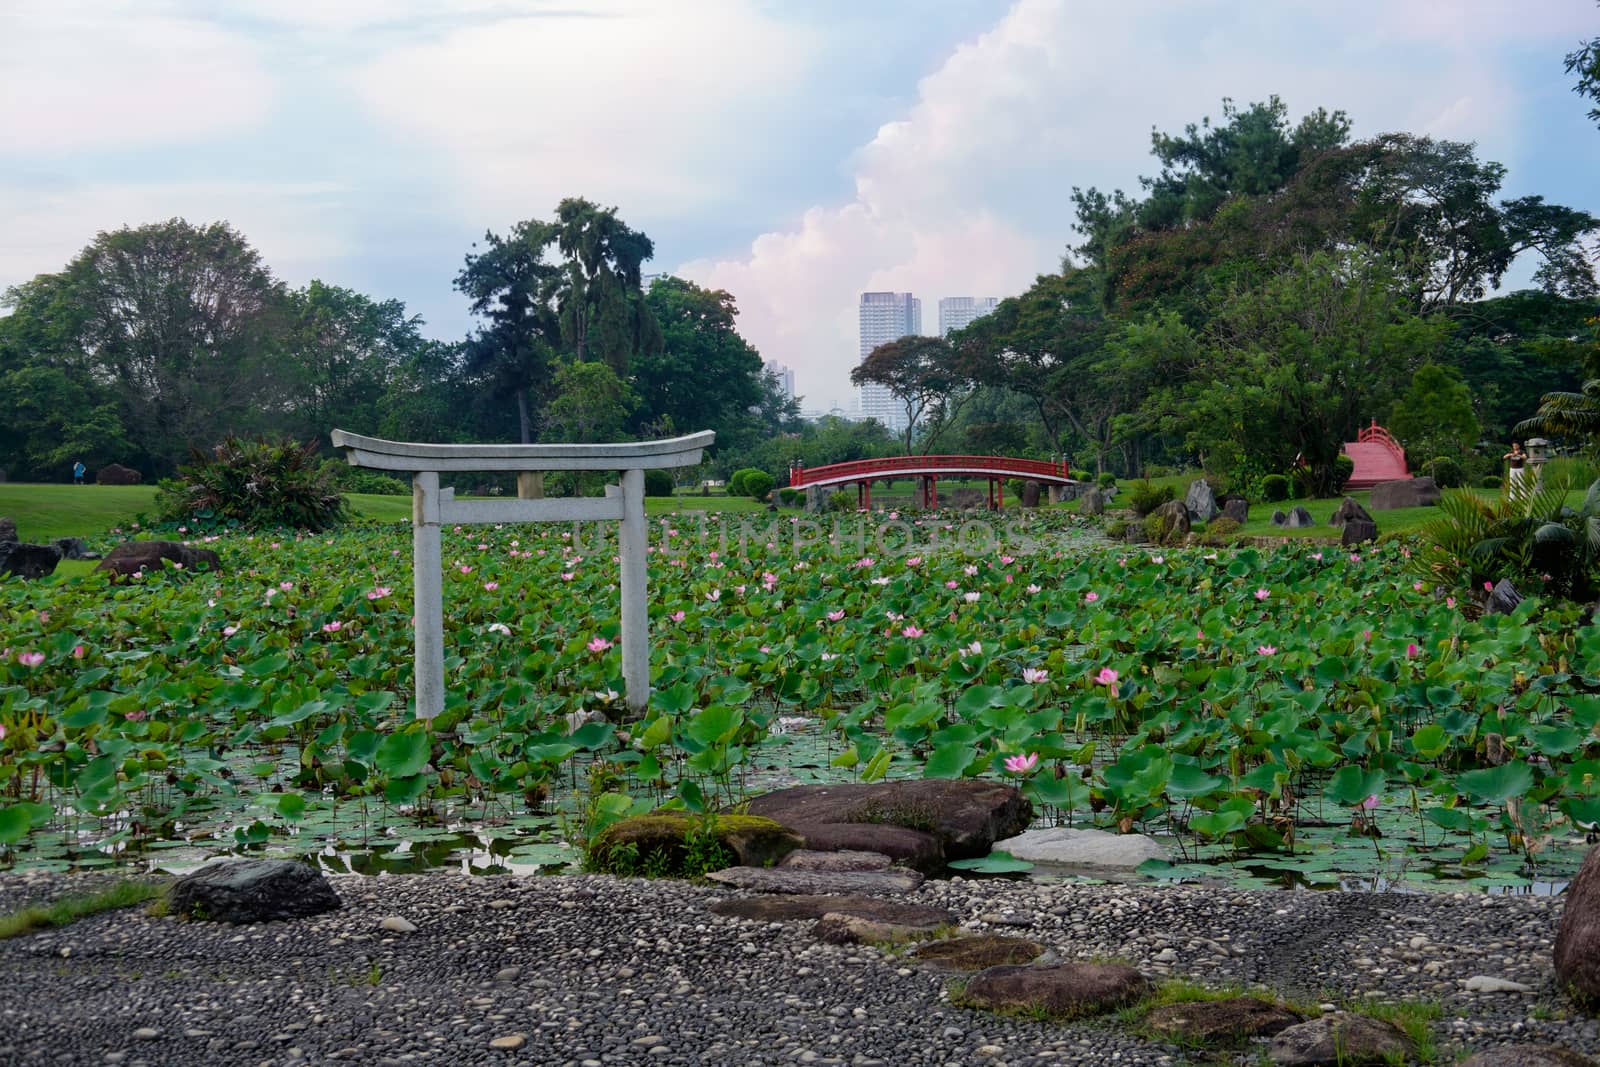 Pond of lotuses in japanese garden. Singapore